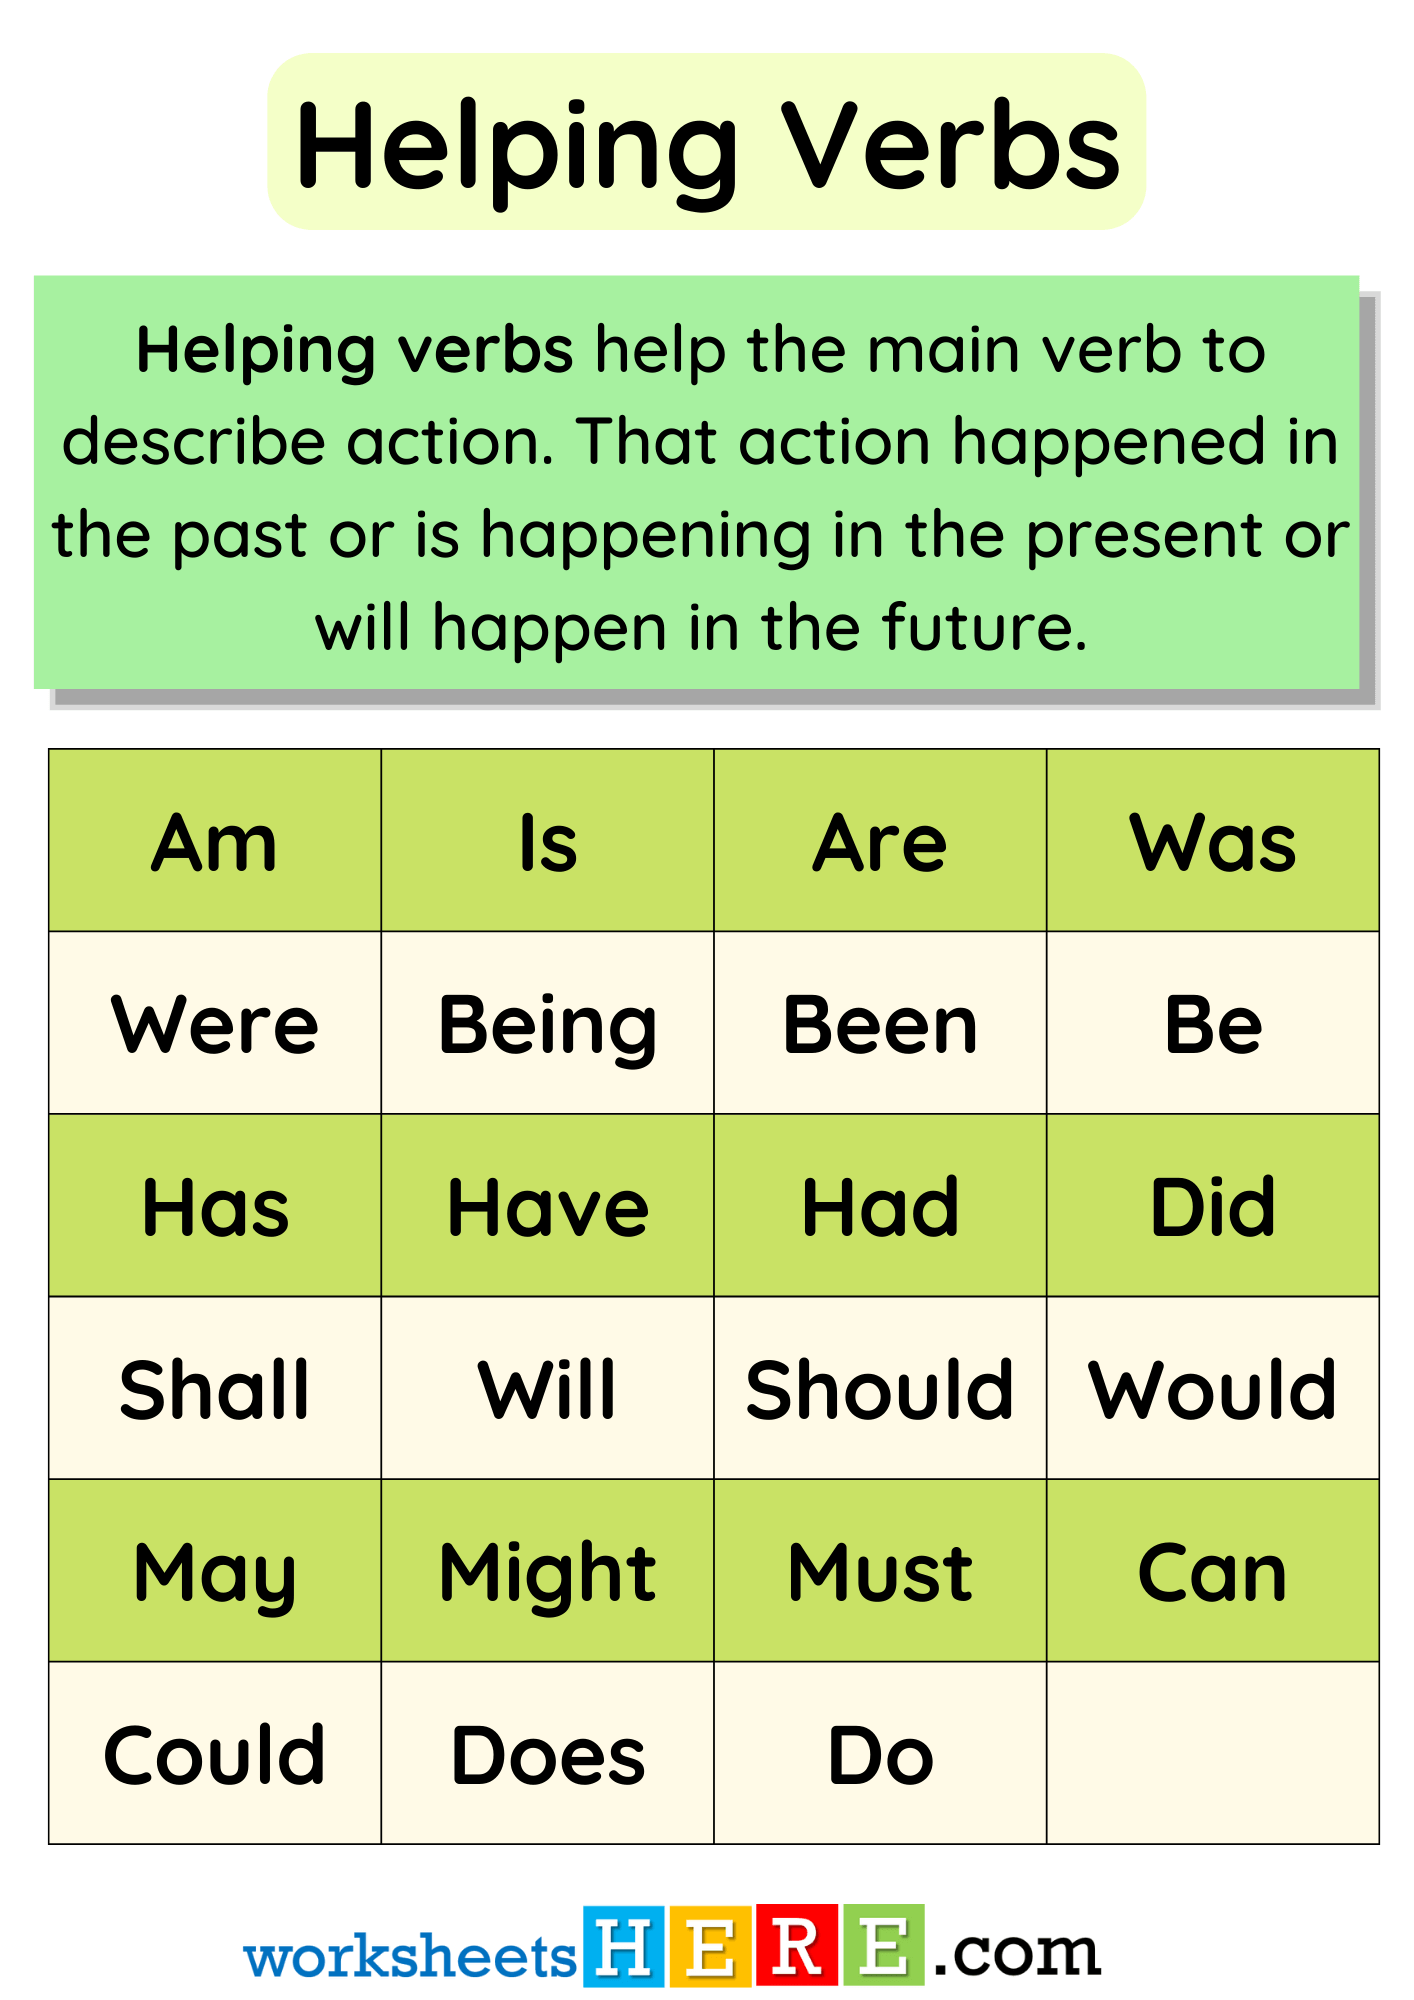 Helping Verbs List, Definition and Examples PDF Worksheet For Students